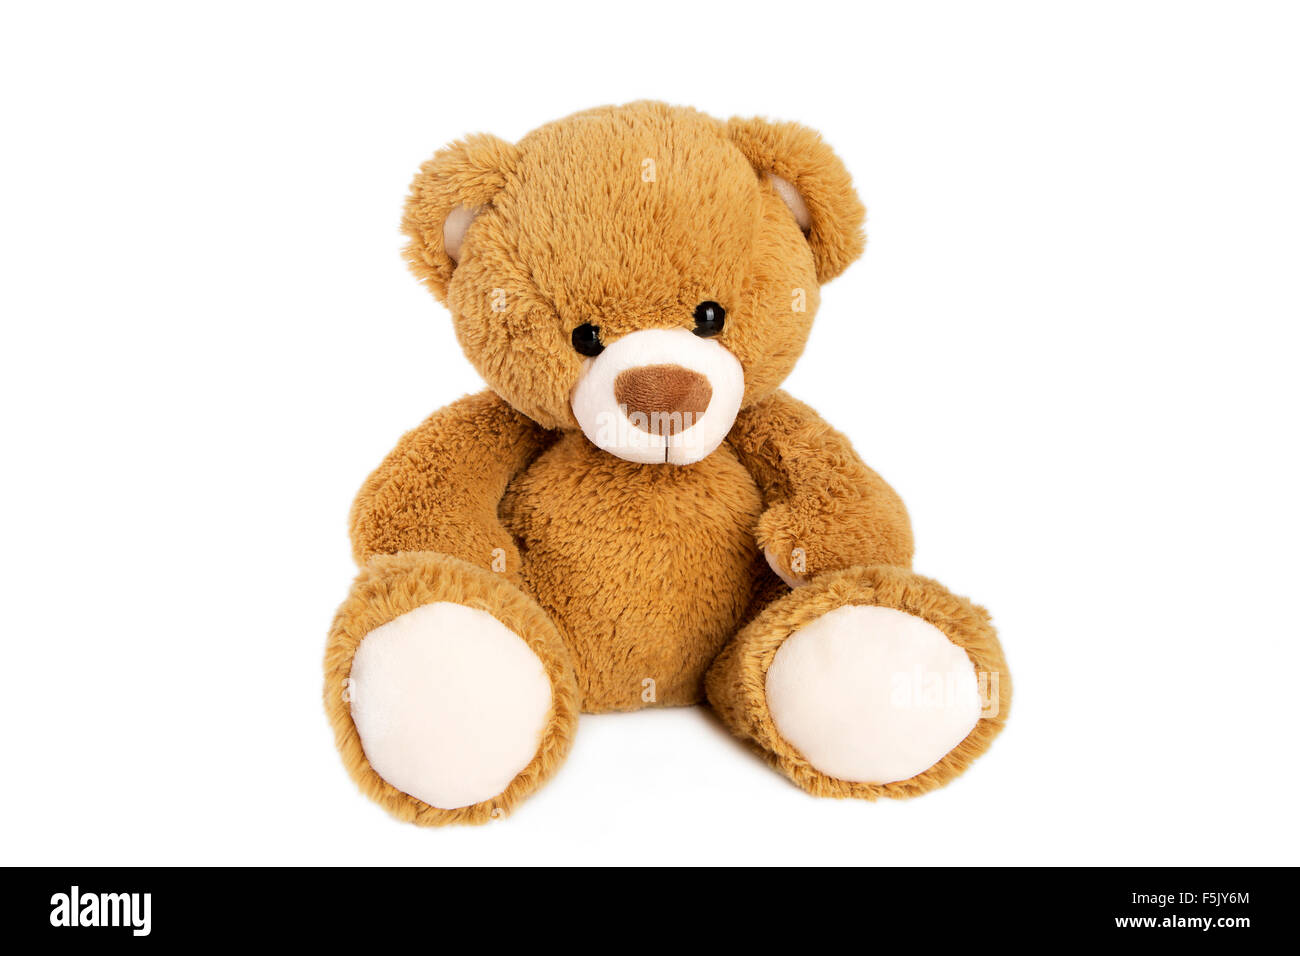 Brown teddy bear isolated in front of a white background Stock Photo